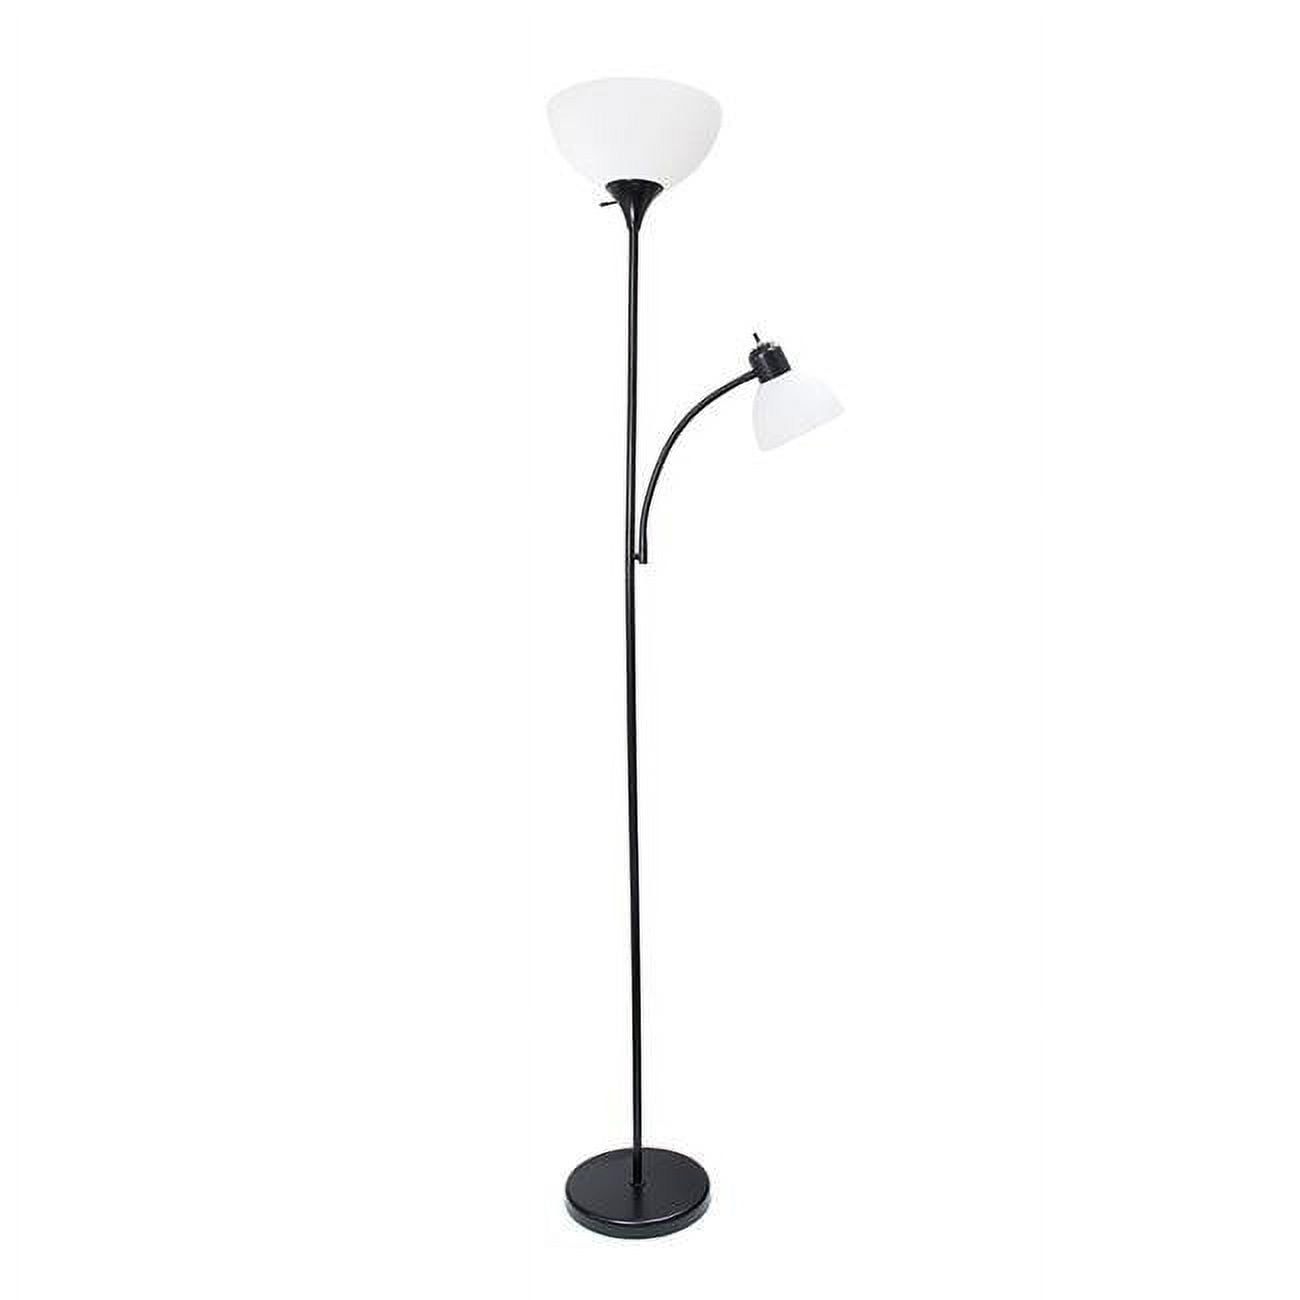 Alltherages Lf2000-blk Simple Designs Floor Lamp With Reading Light, Black